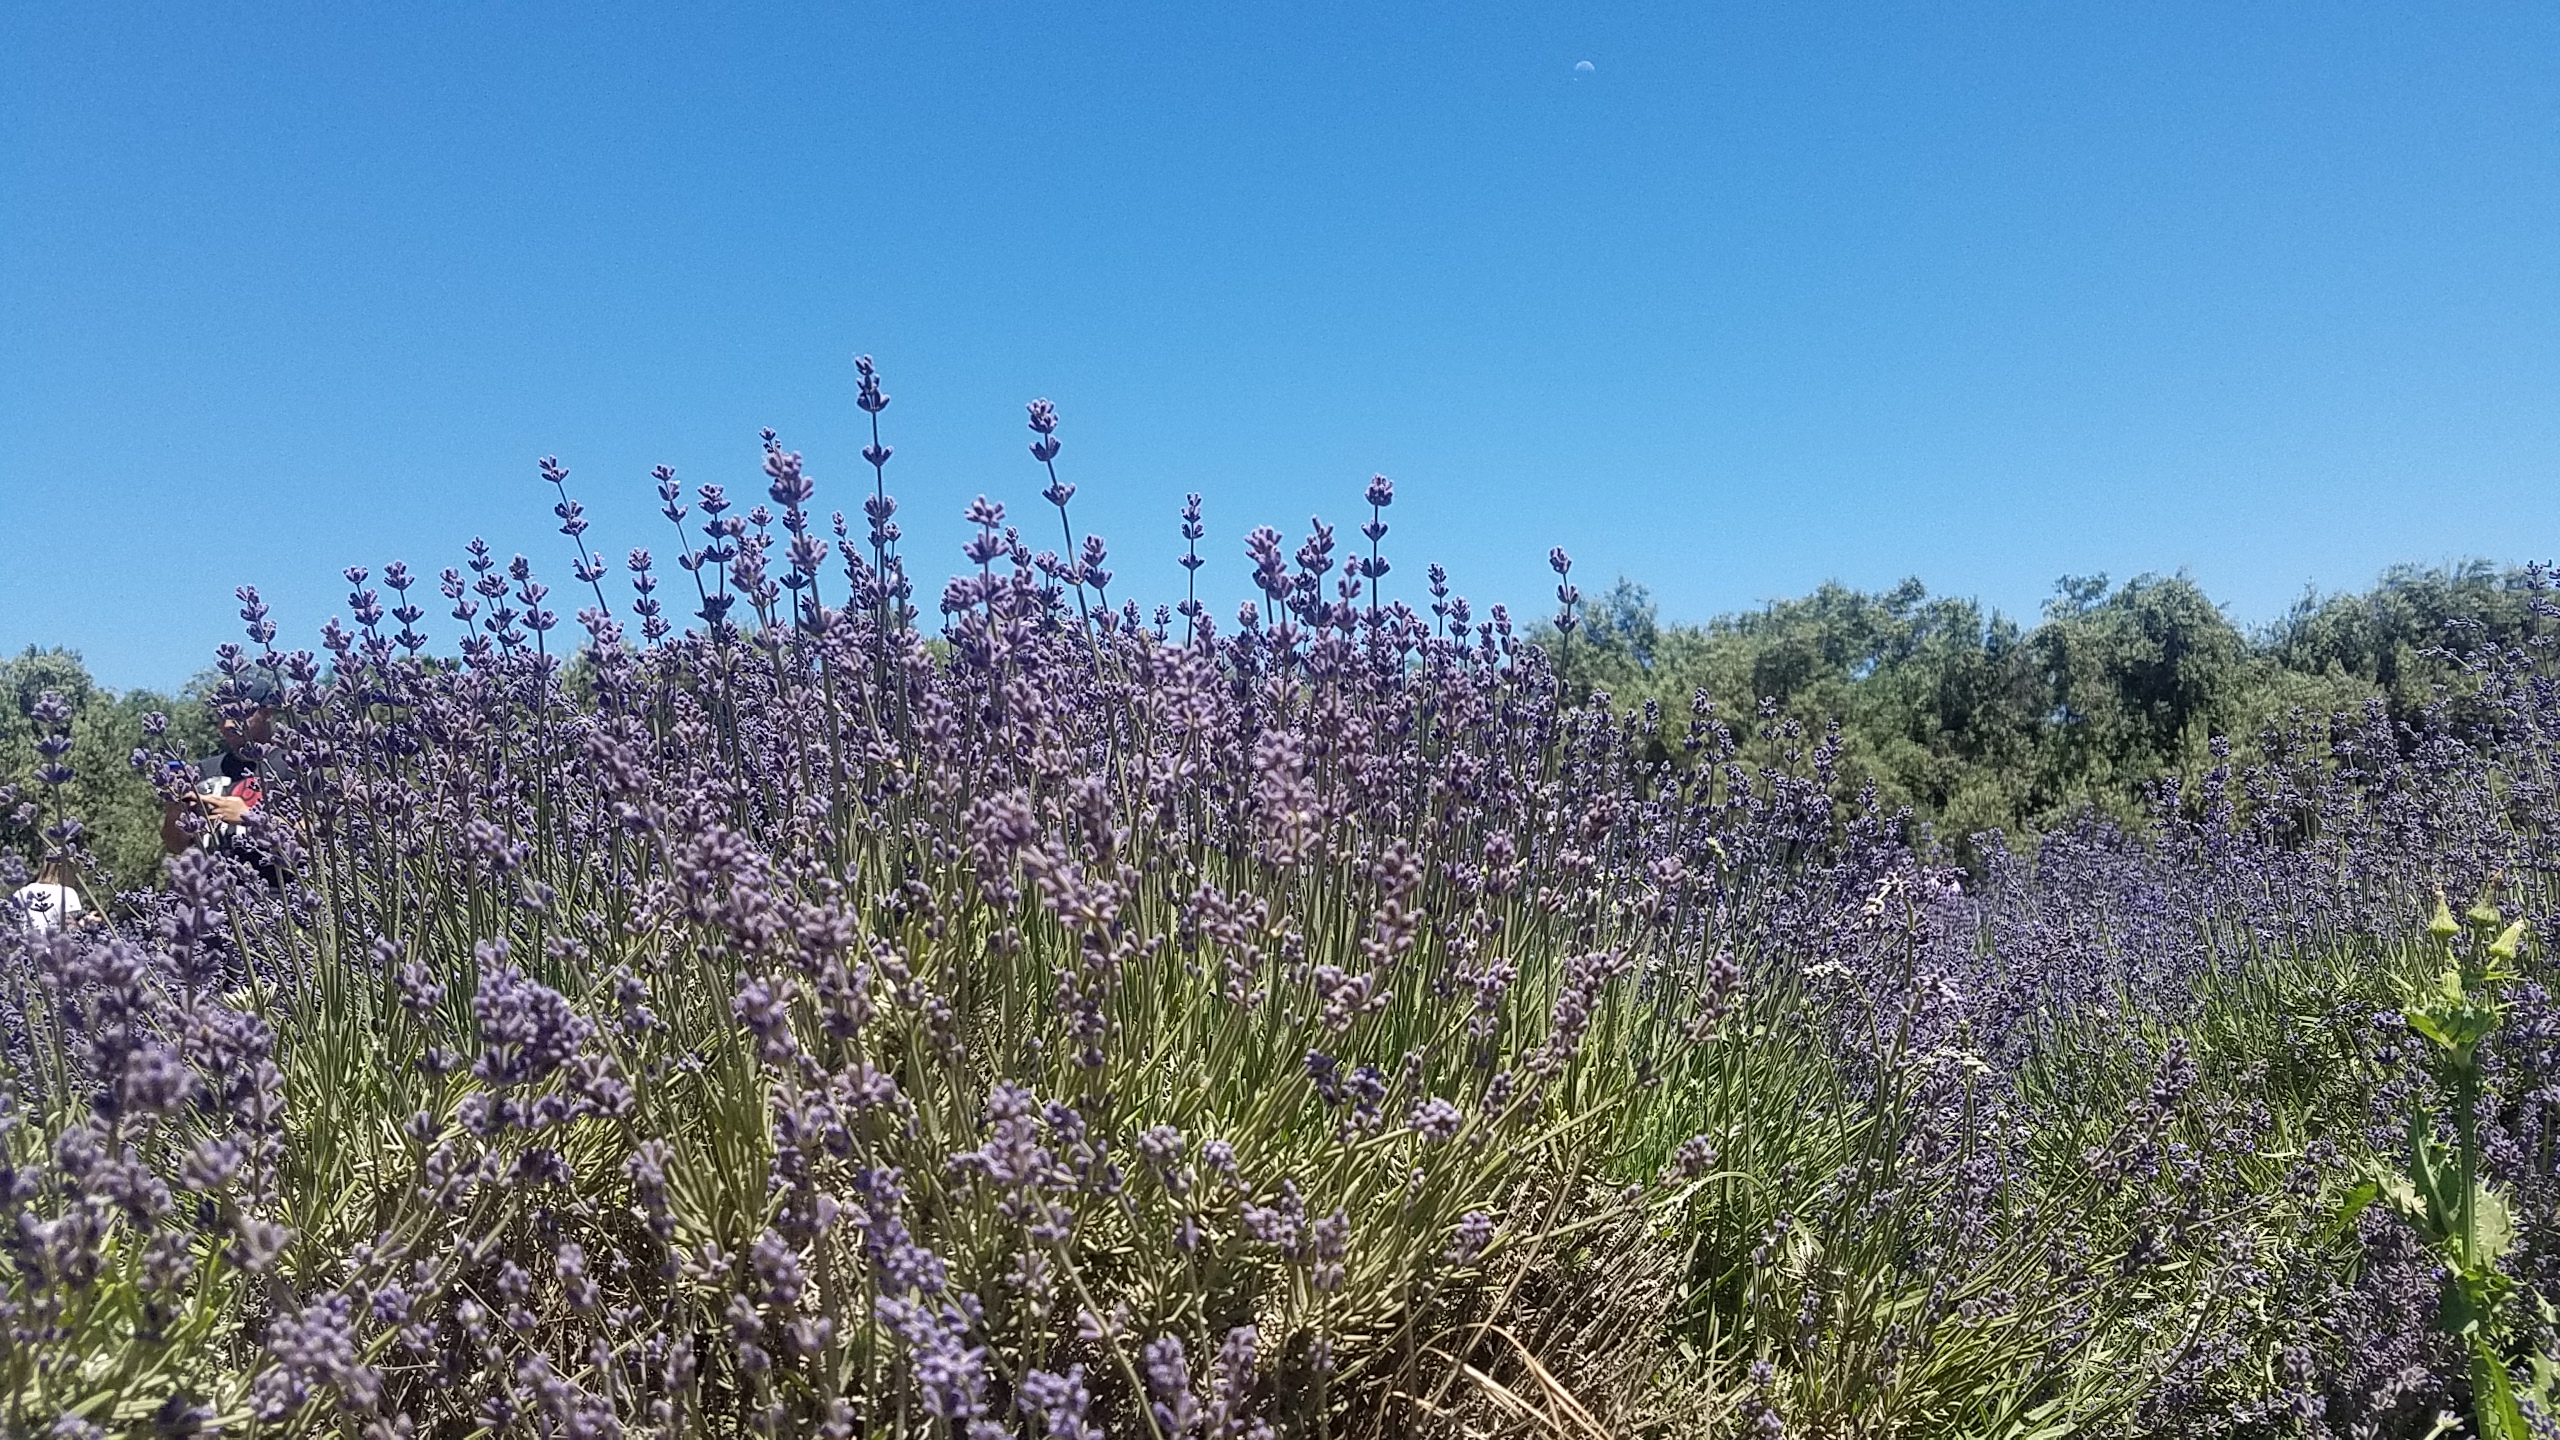 Lovely View of the Lavender Fields w/ the Day Moon in the Background